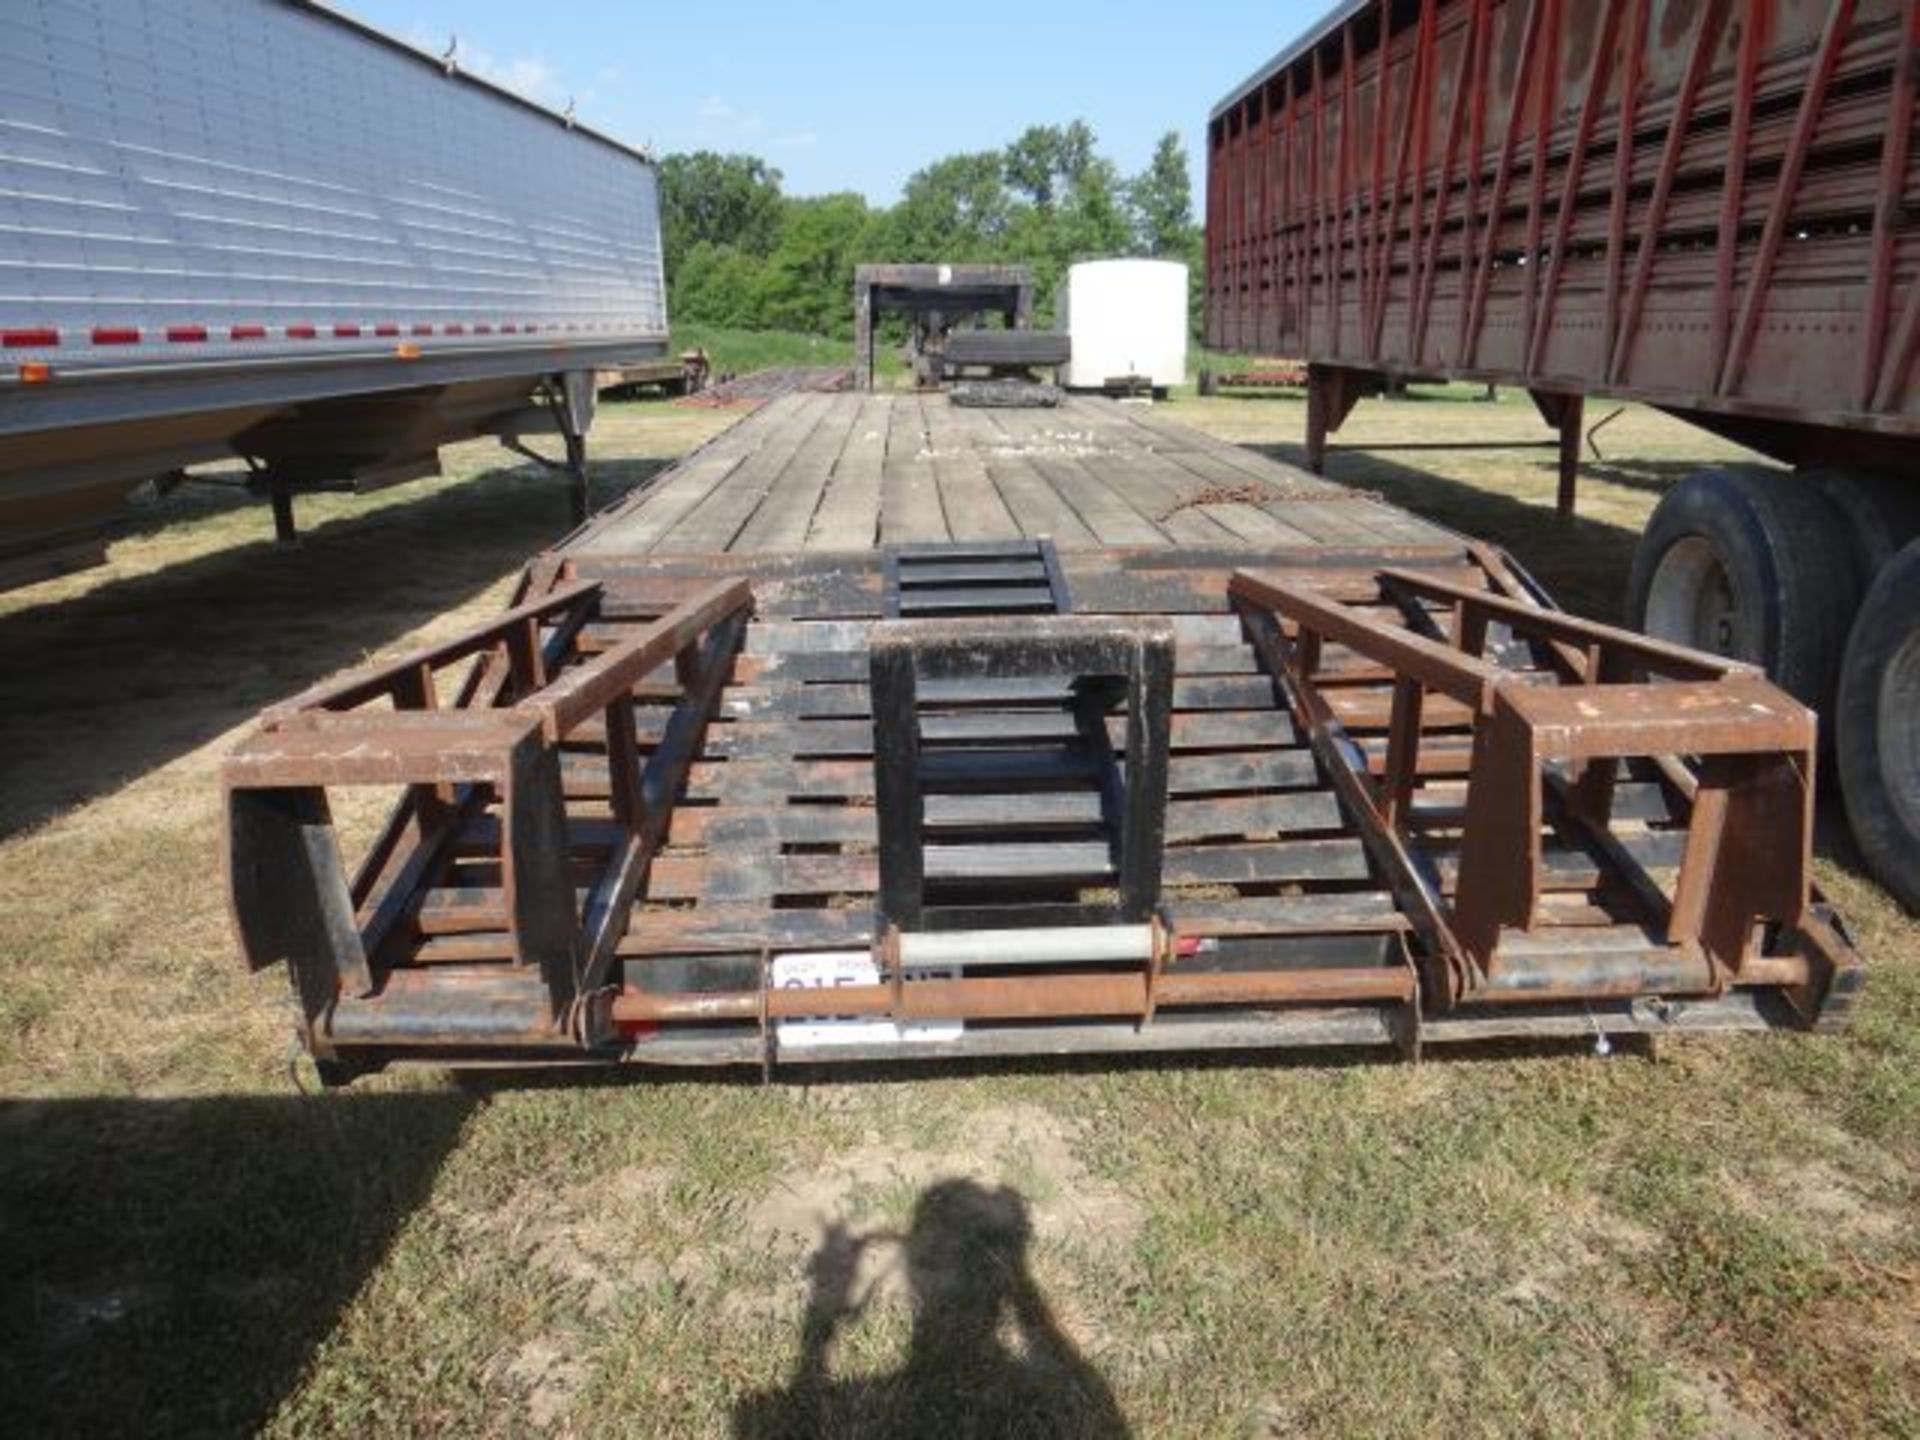 1993 Flatbed Trailer 25' w/5' Dovetail, 8' Width, Gooseneck, Title in the Office - Image 3 of 3